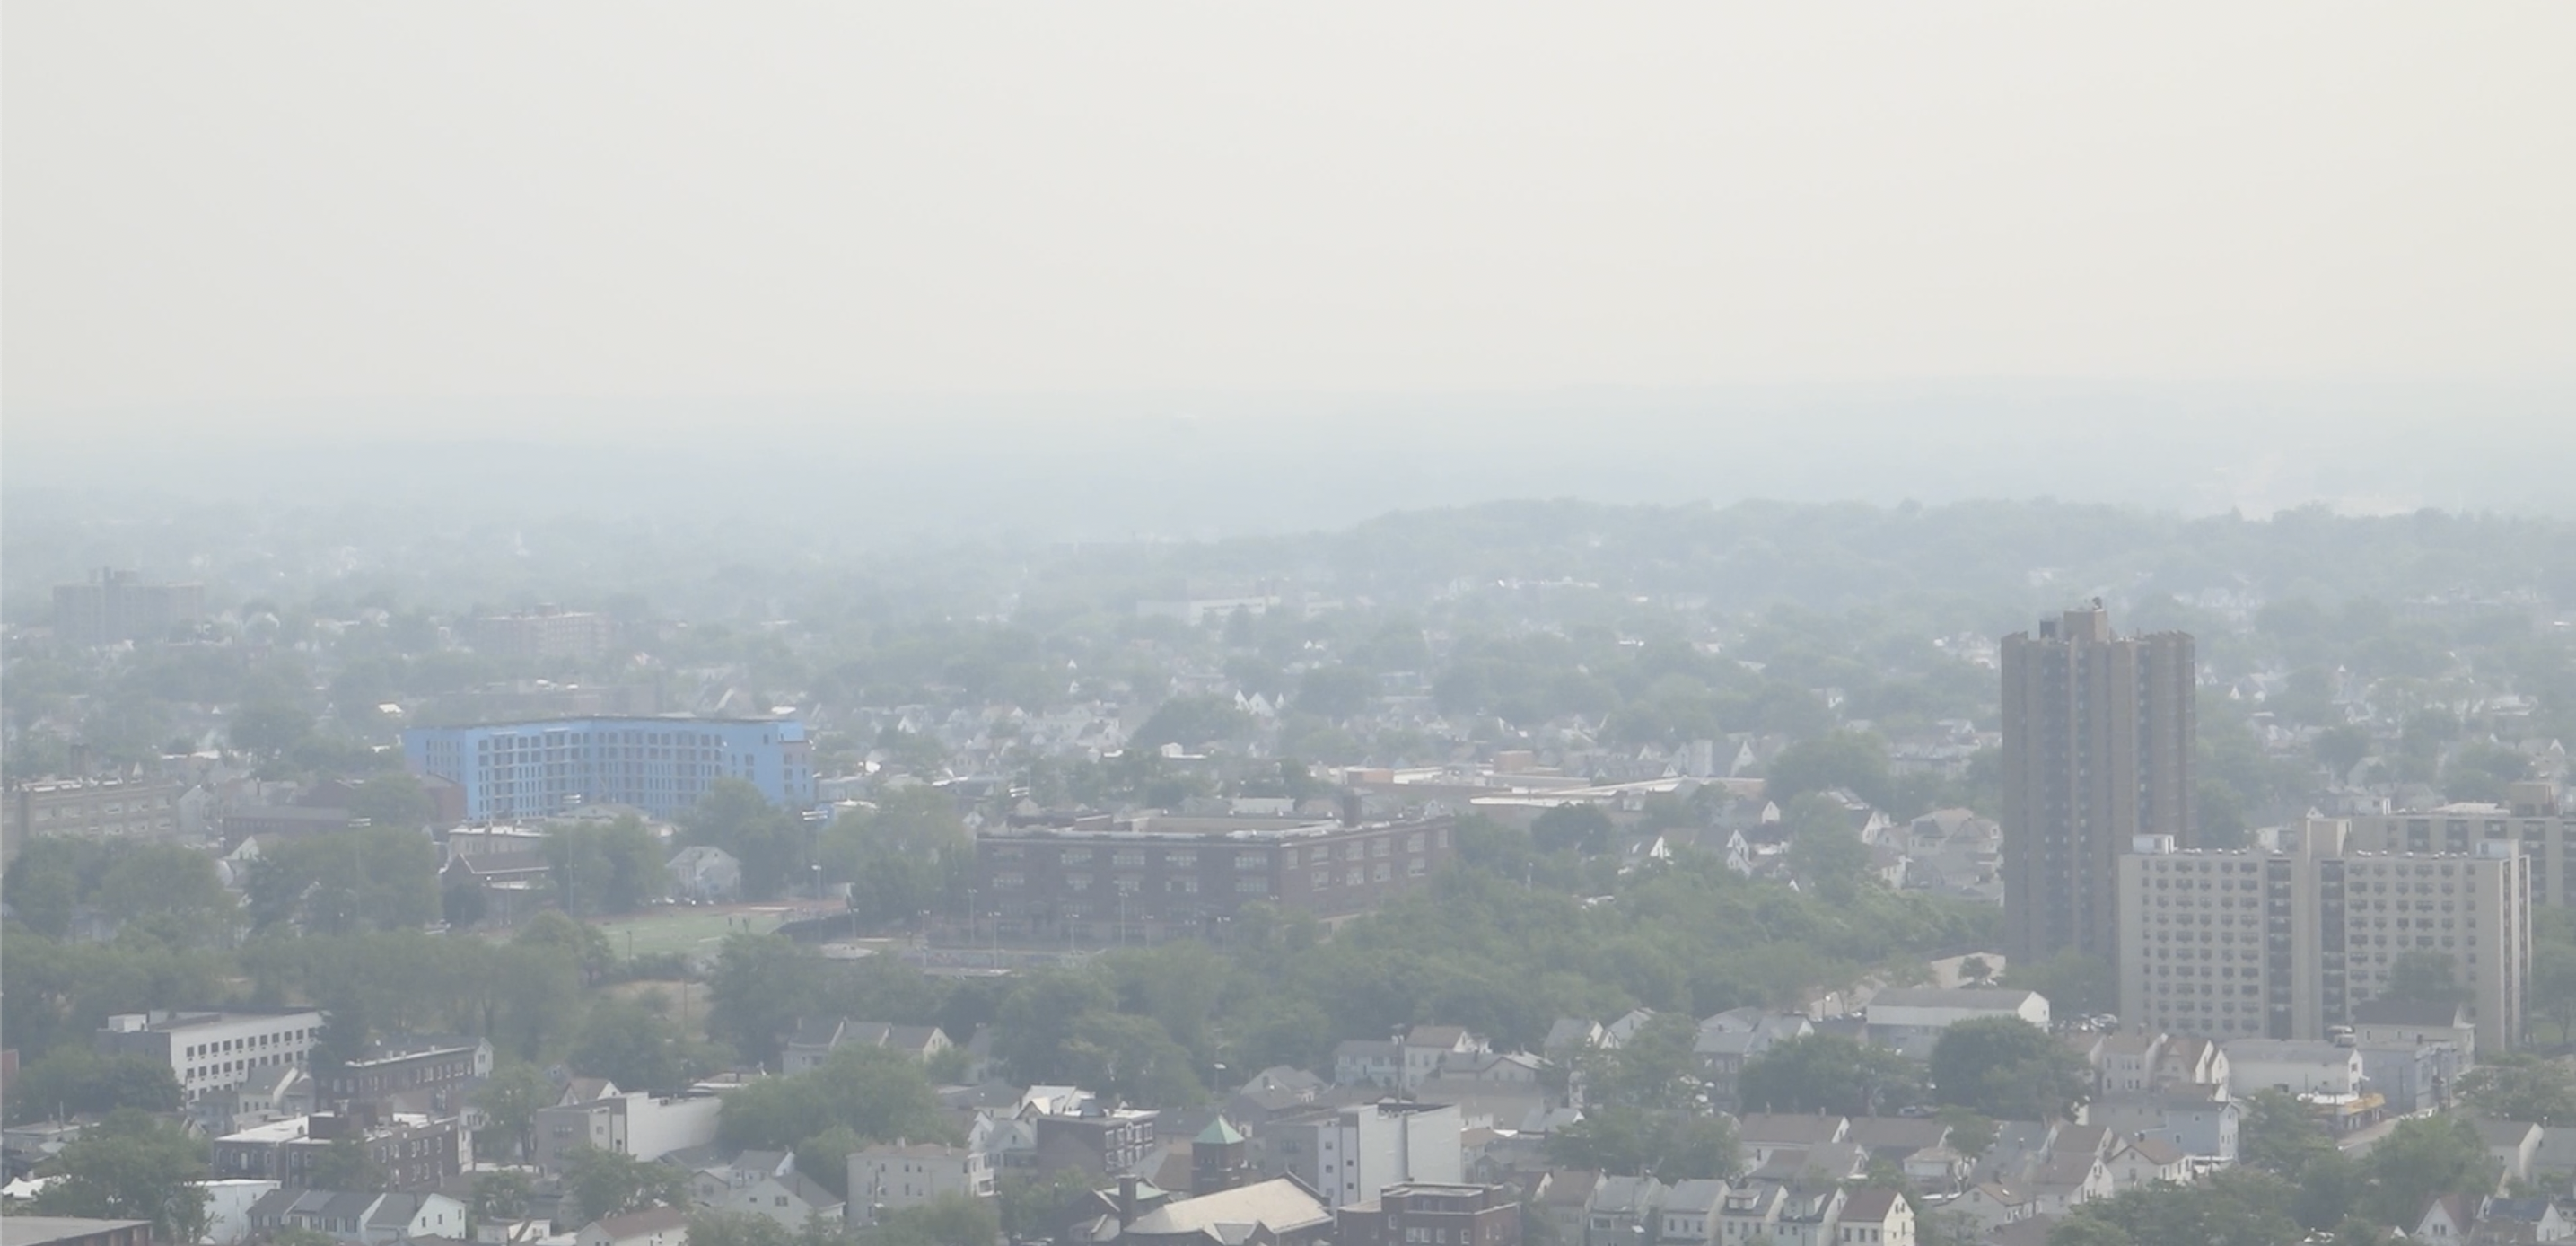 CANADIAN WILDFIRES LEAD TO AIR QUALITY ALERT IN NEW JERSEY